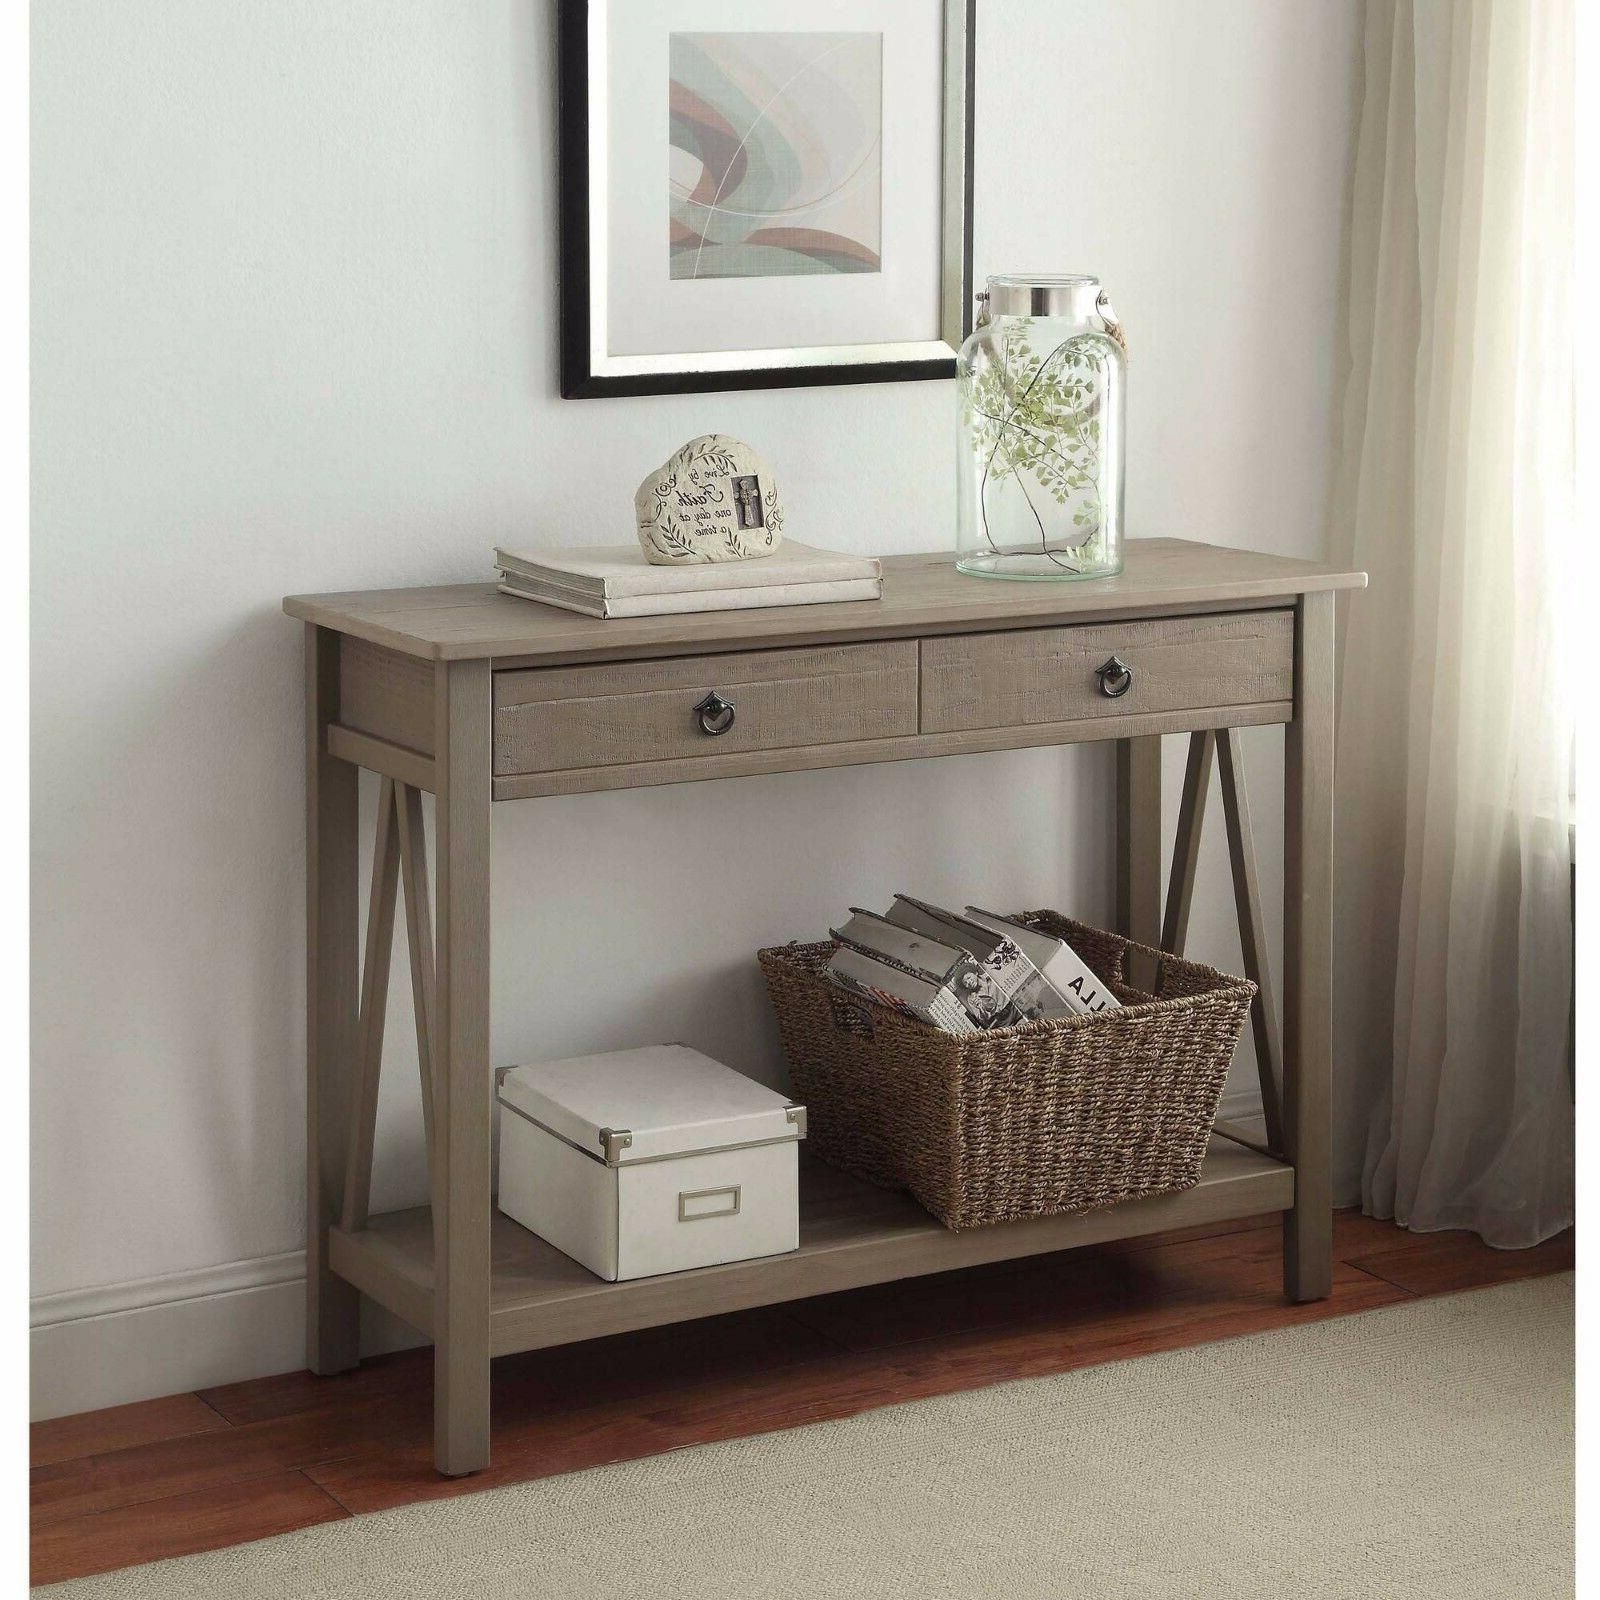 Console Table In Rustic Woodgrain Gray Finish Sof Throughout Aged Black Console Tables (View 9 of 20)